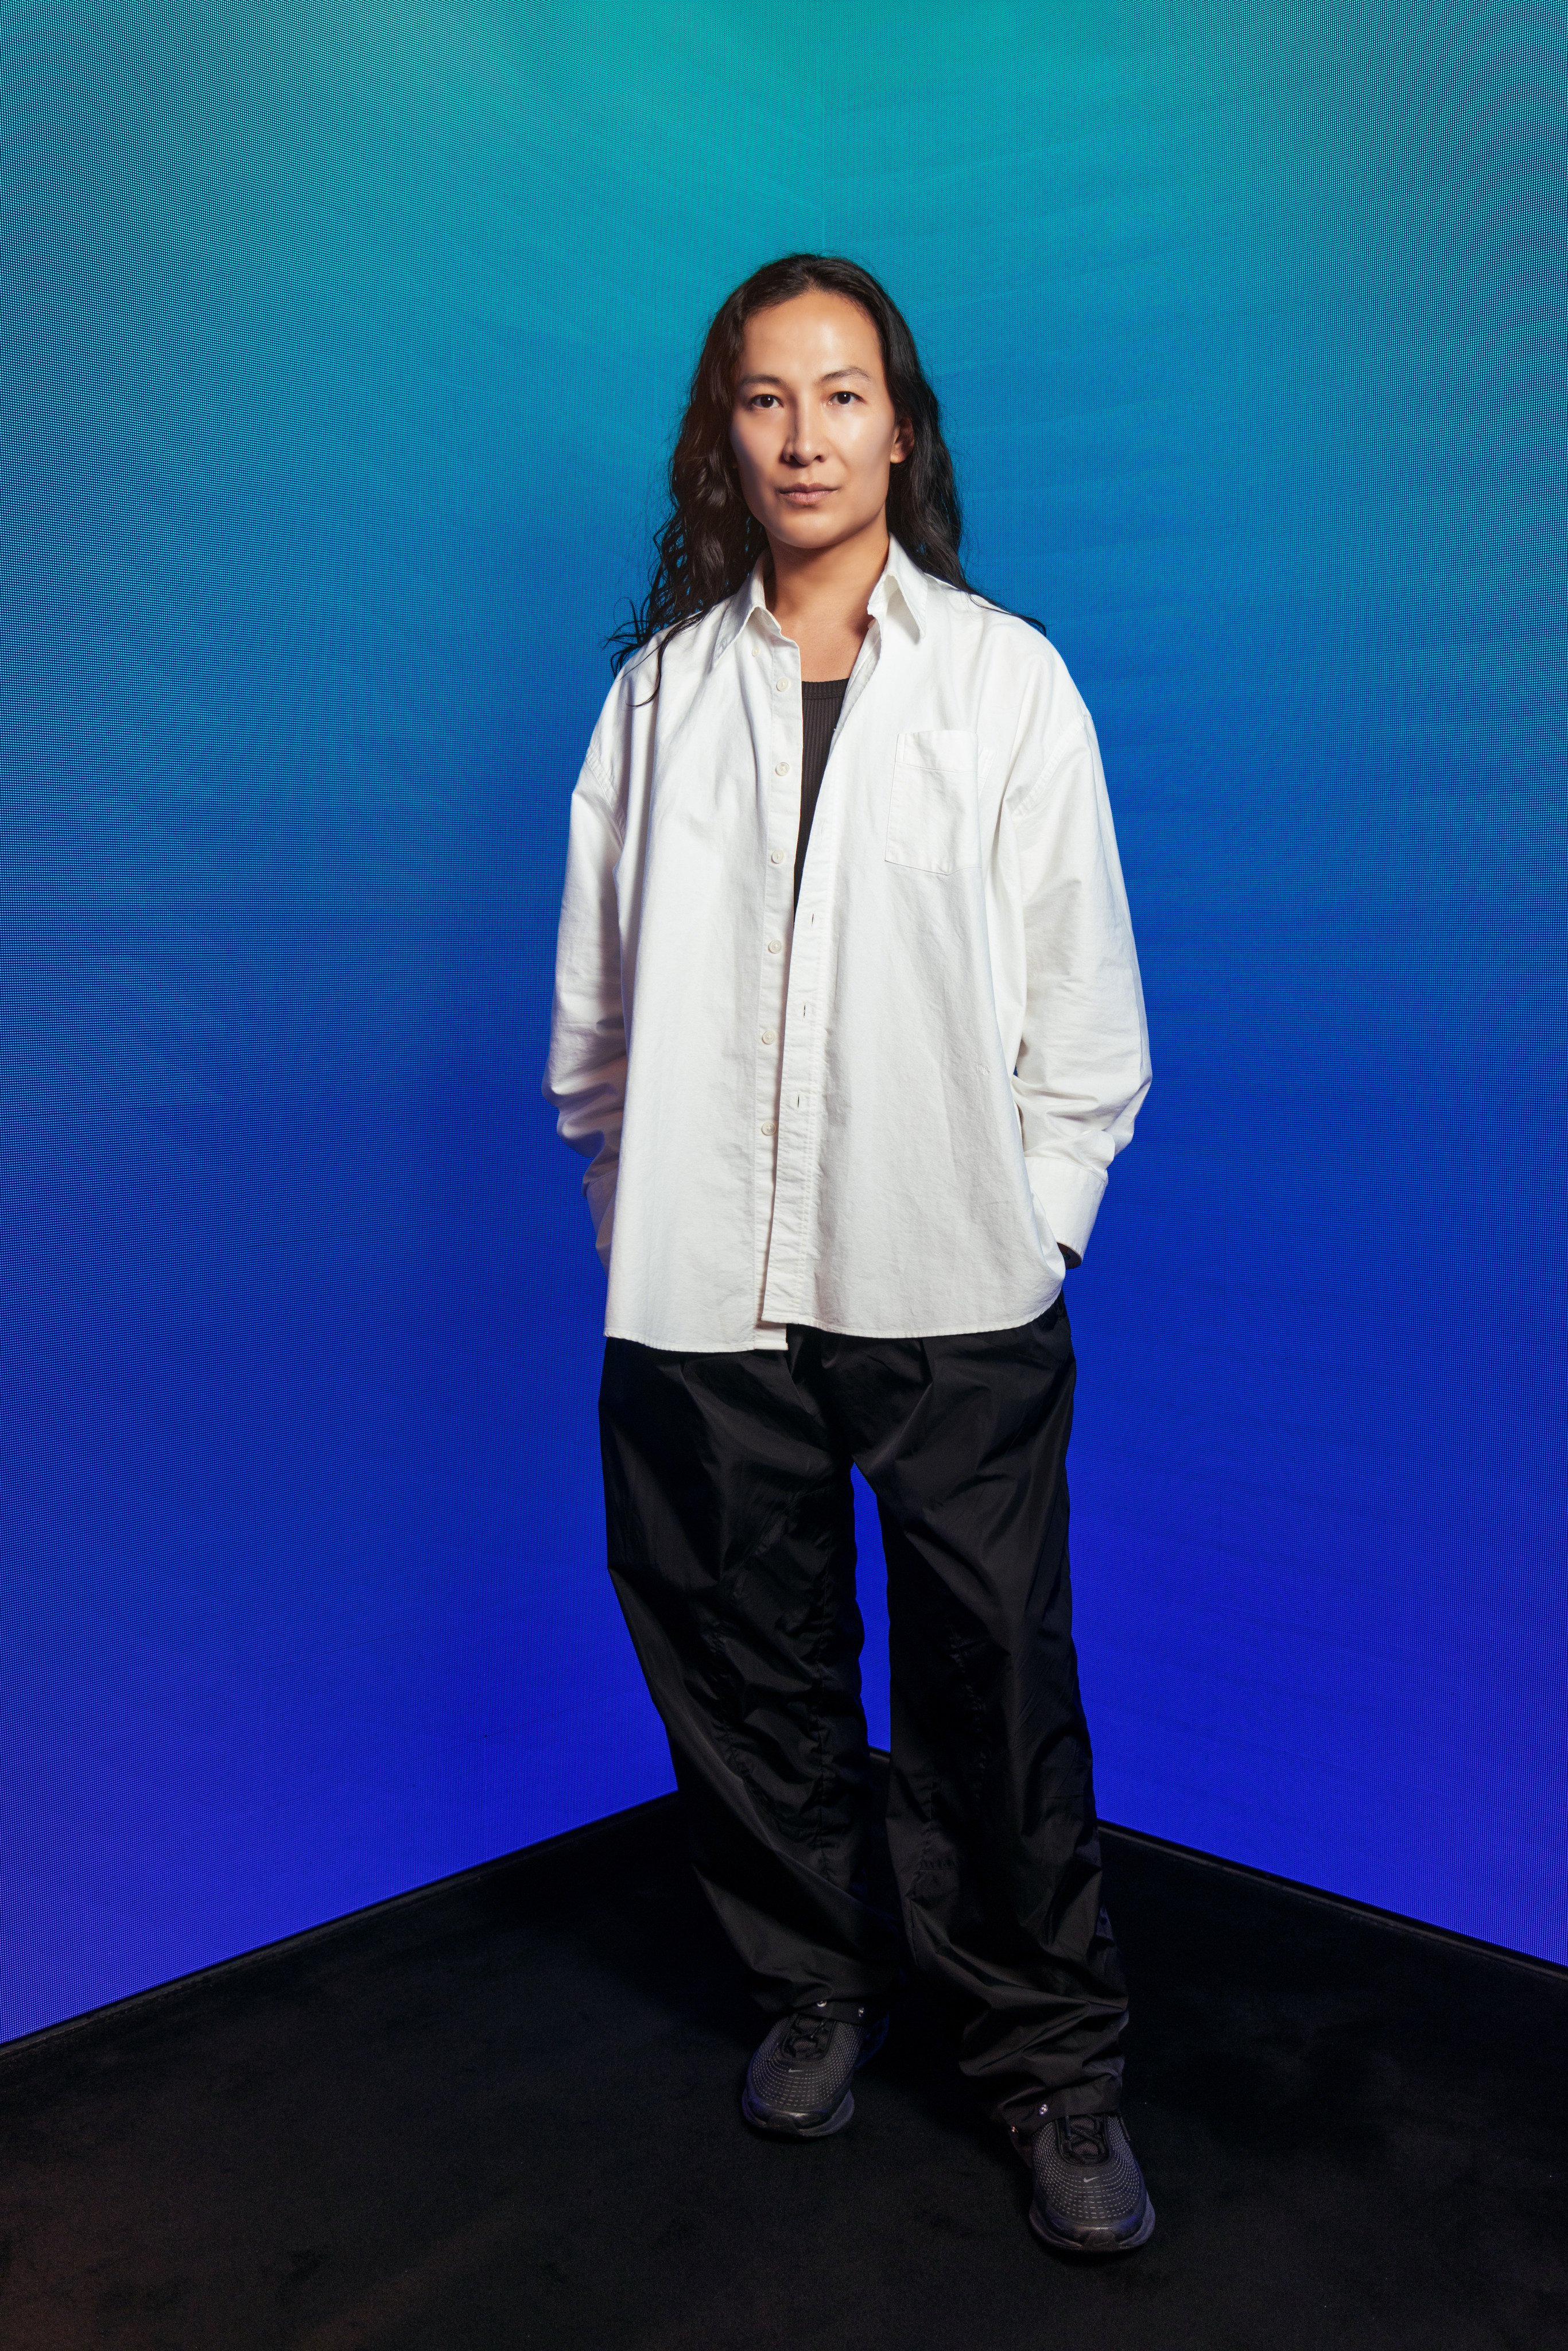 American fashion designer Alexander Wang spoke exclusively to Style about legacy, maturity and AI. Photos: Handout